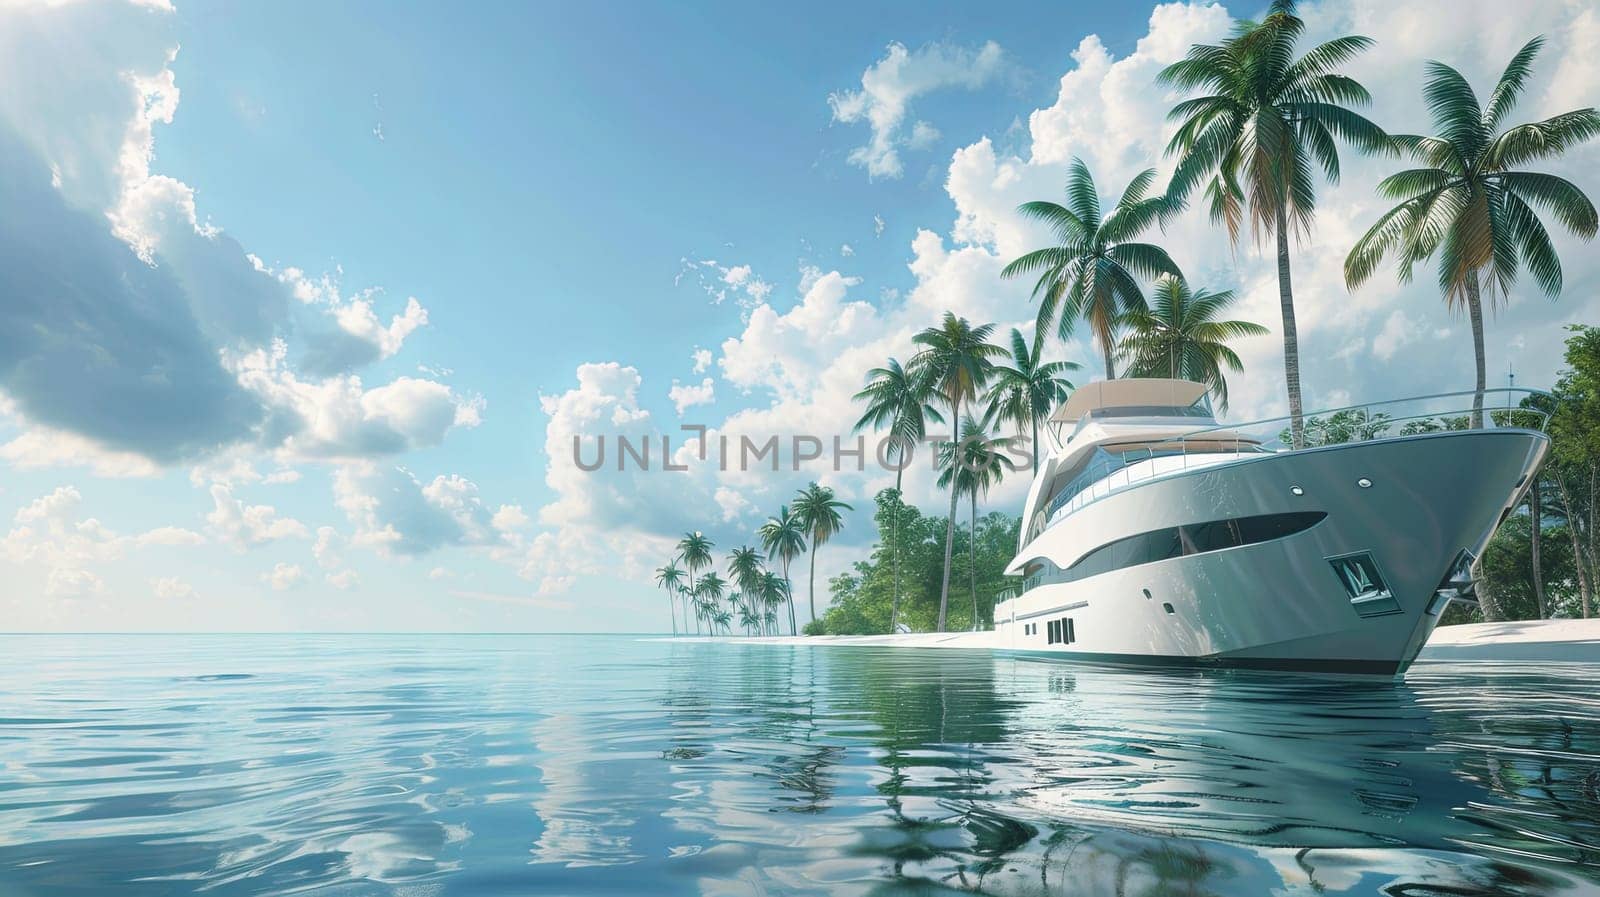 A large white boat gracefully floats on top of a calm body of water, surrounded by the peaceful beauty of a tranquil lagoon with lush green palm trees lining the shore.